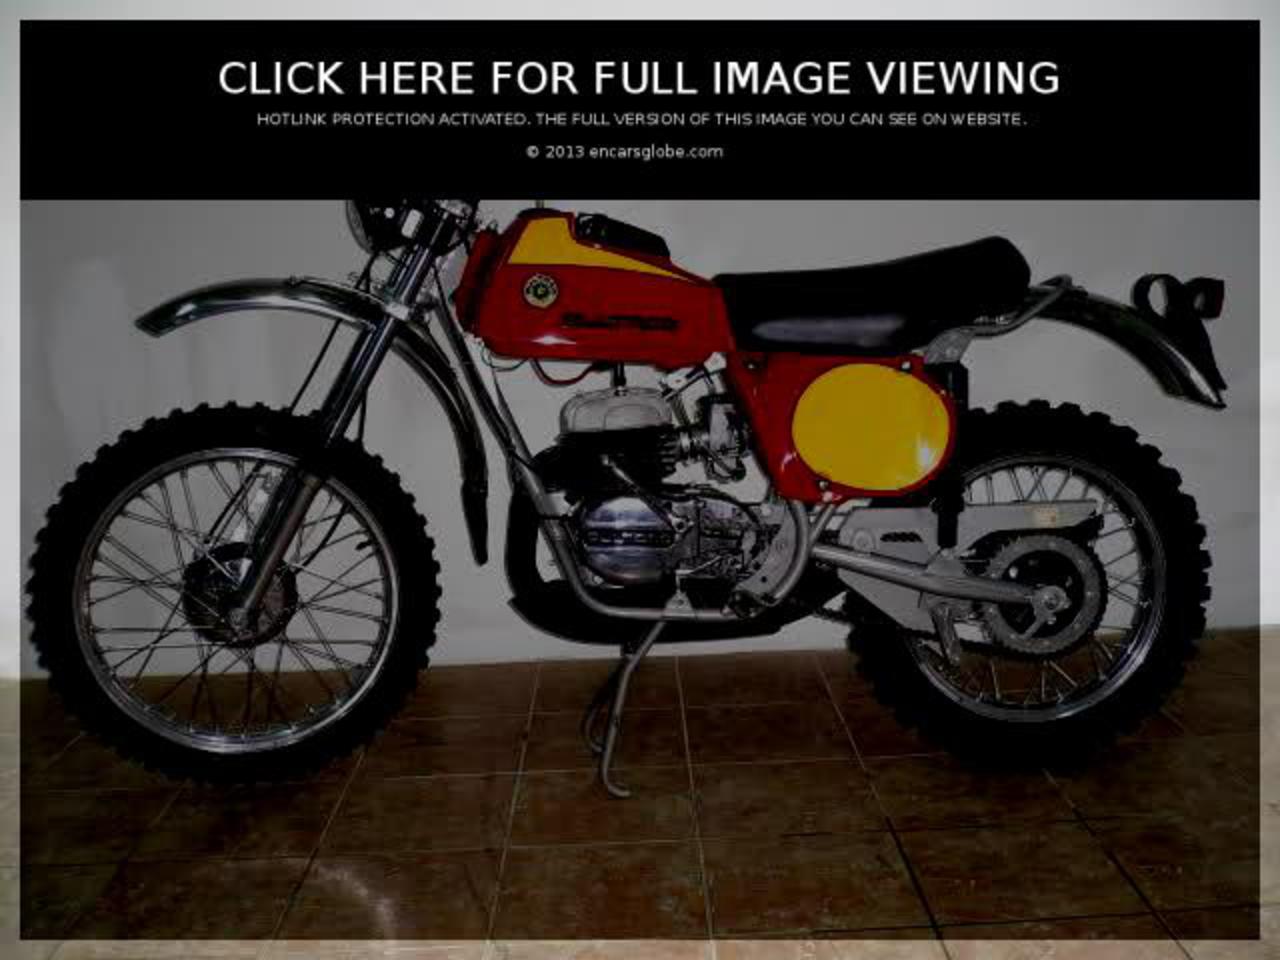 Bultaco Frontera Photo Gallery: Photo #02 out of 10, Image Size ...